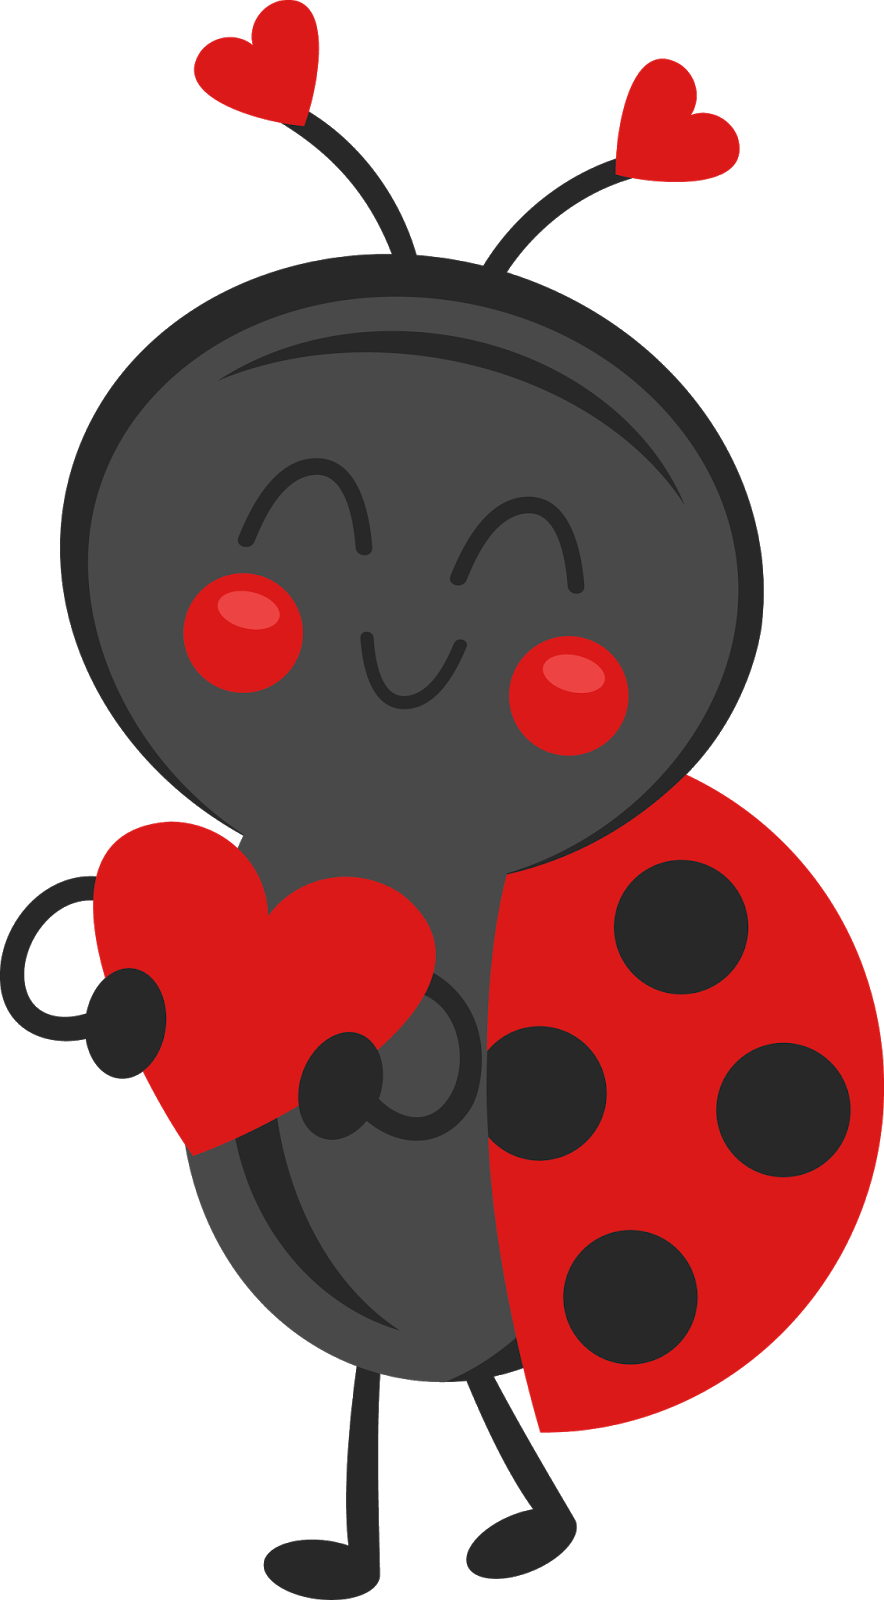 38+ Cute ladybug clipart free collection